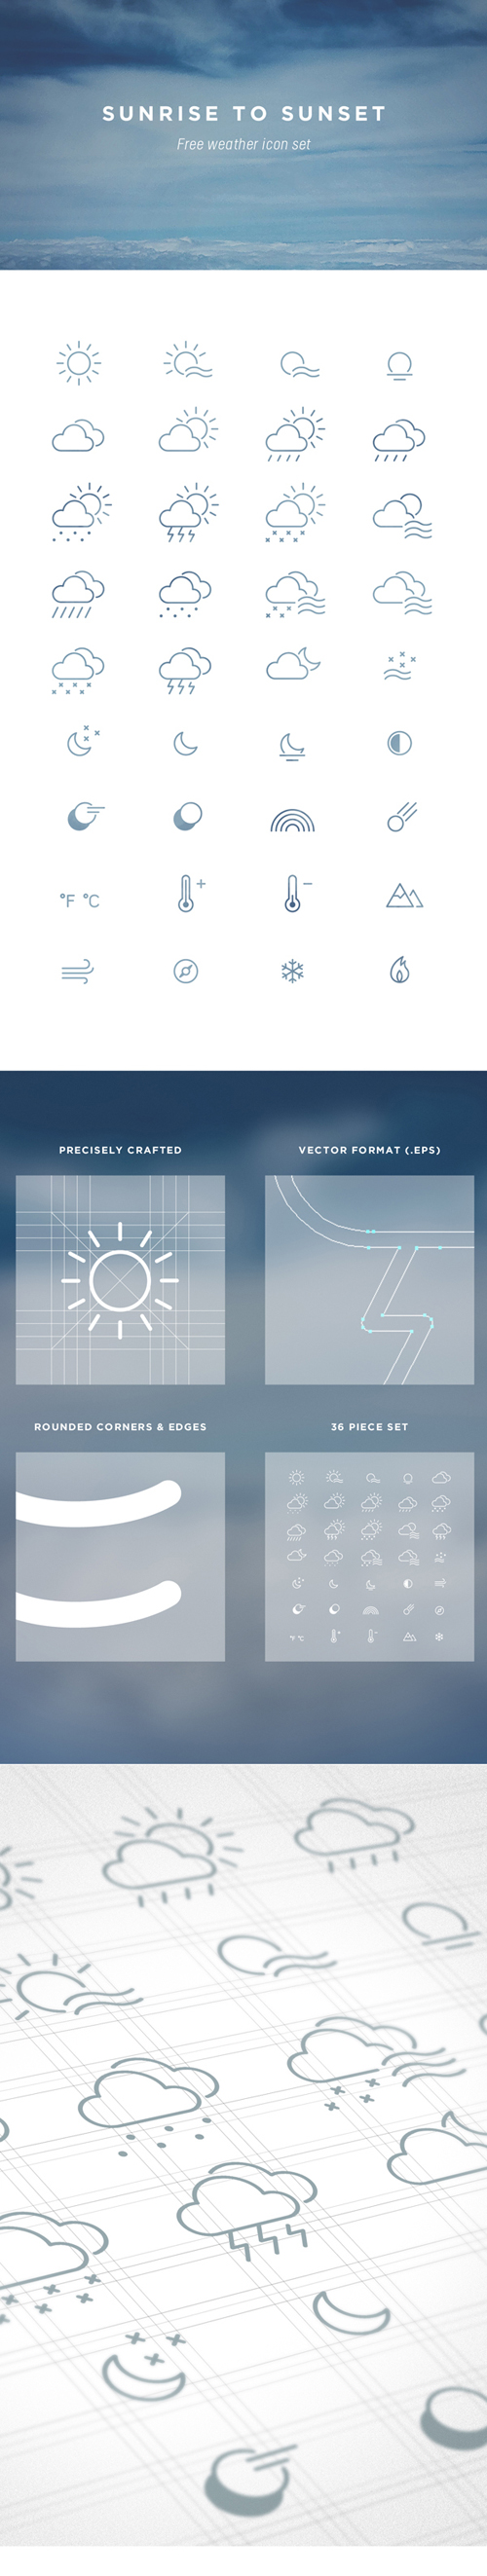 Creative outline weather icons vector weather icons weather outline icons icon creative   